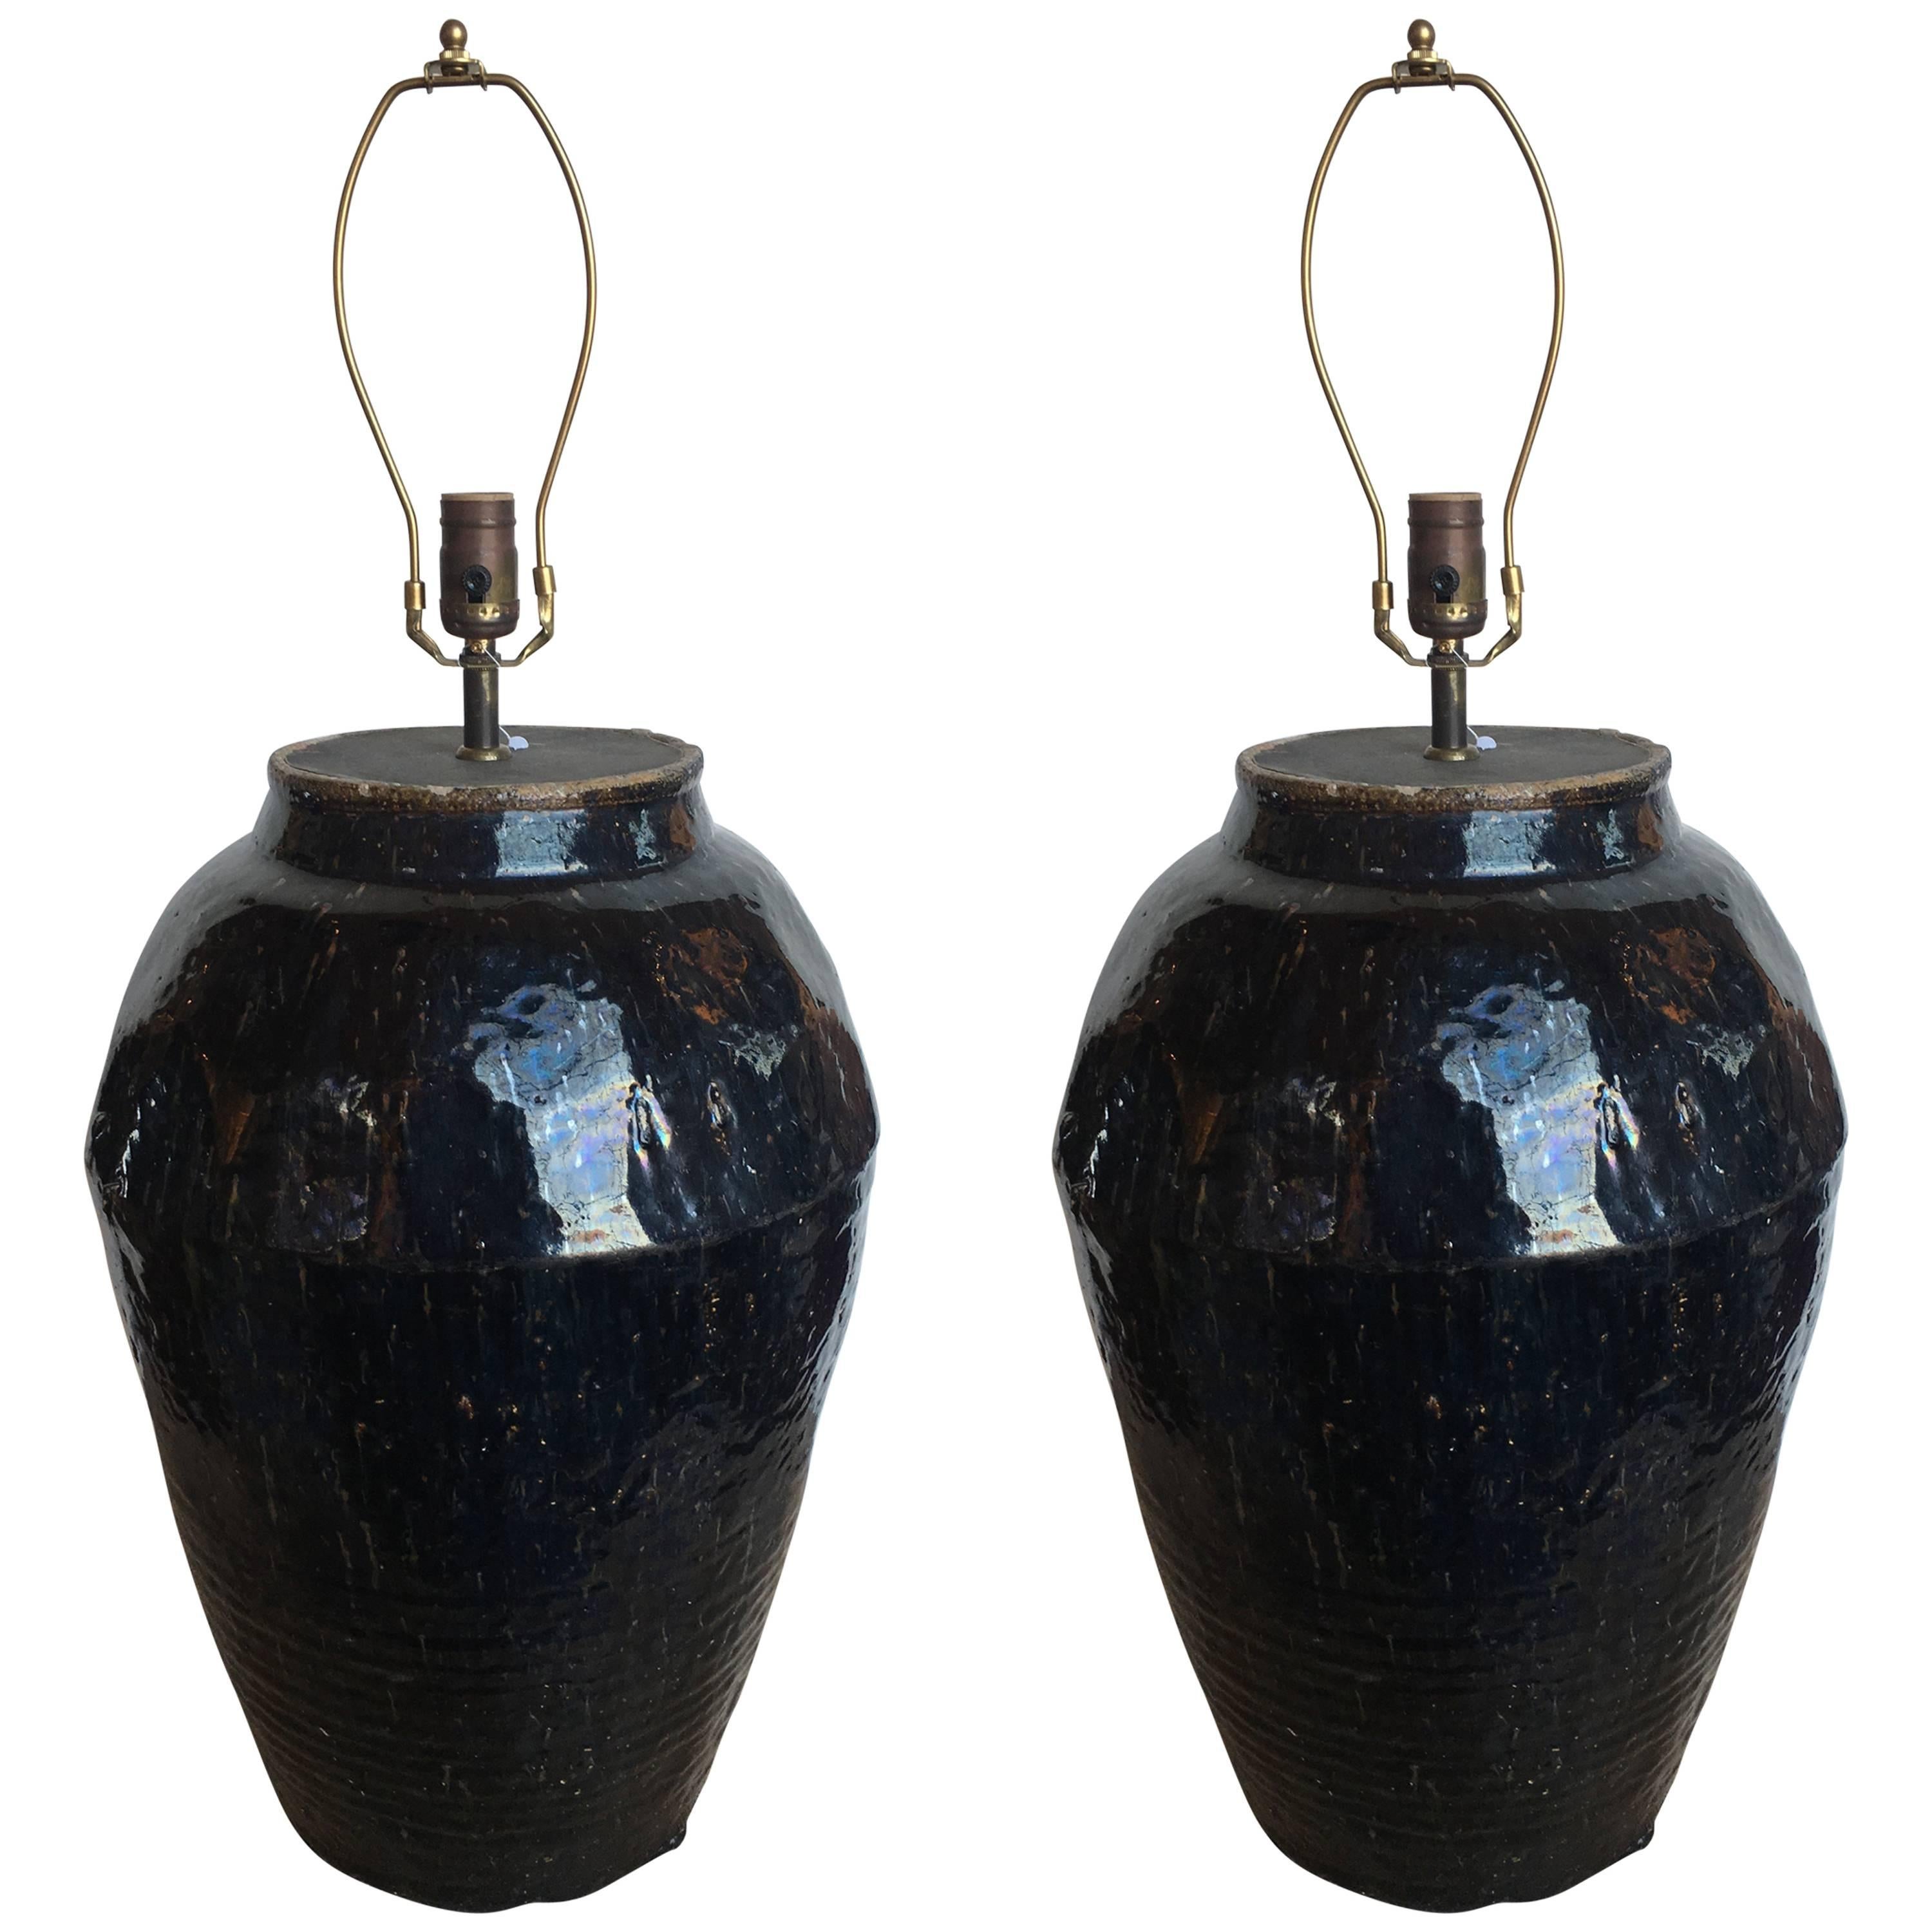 Pair of 19th Century Chinese Glazed Black/Brown Pot Lamps